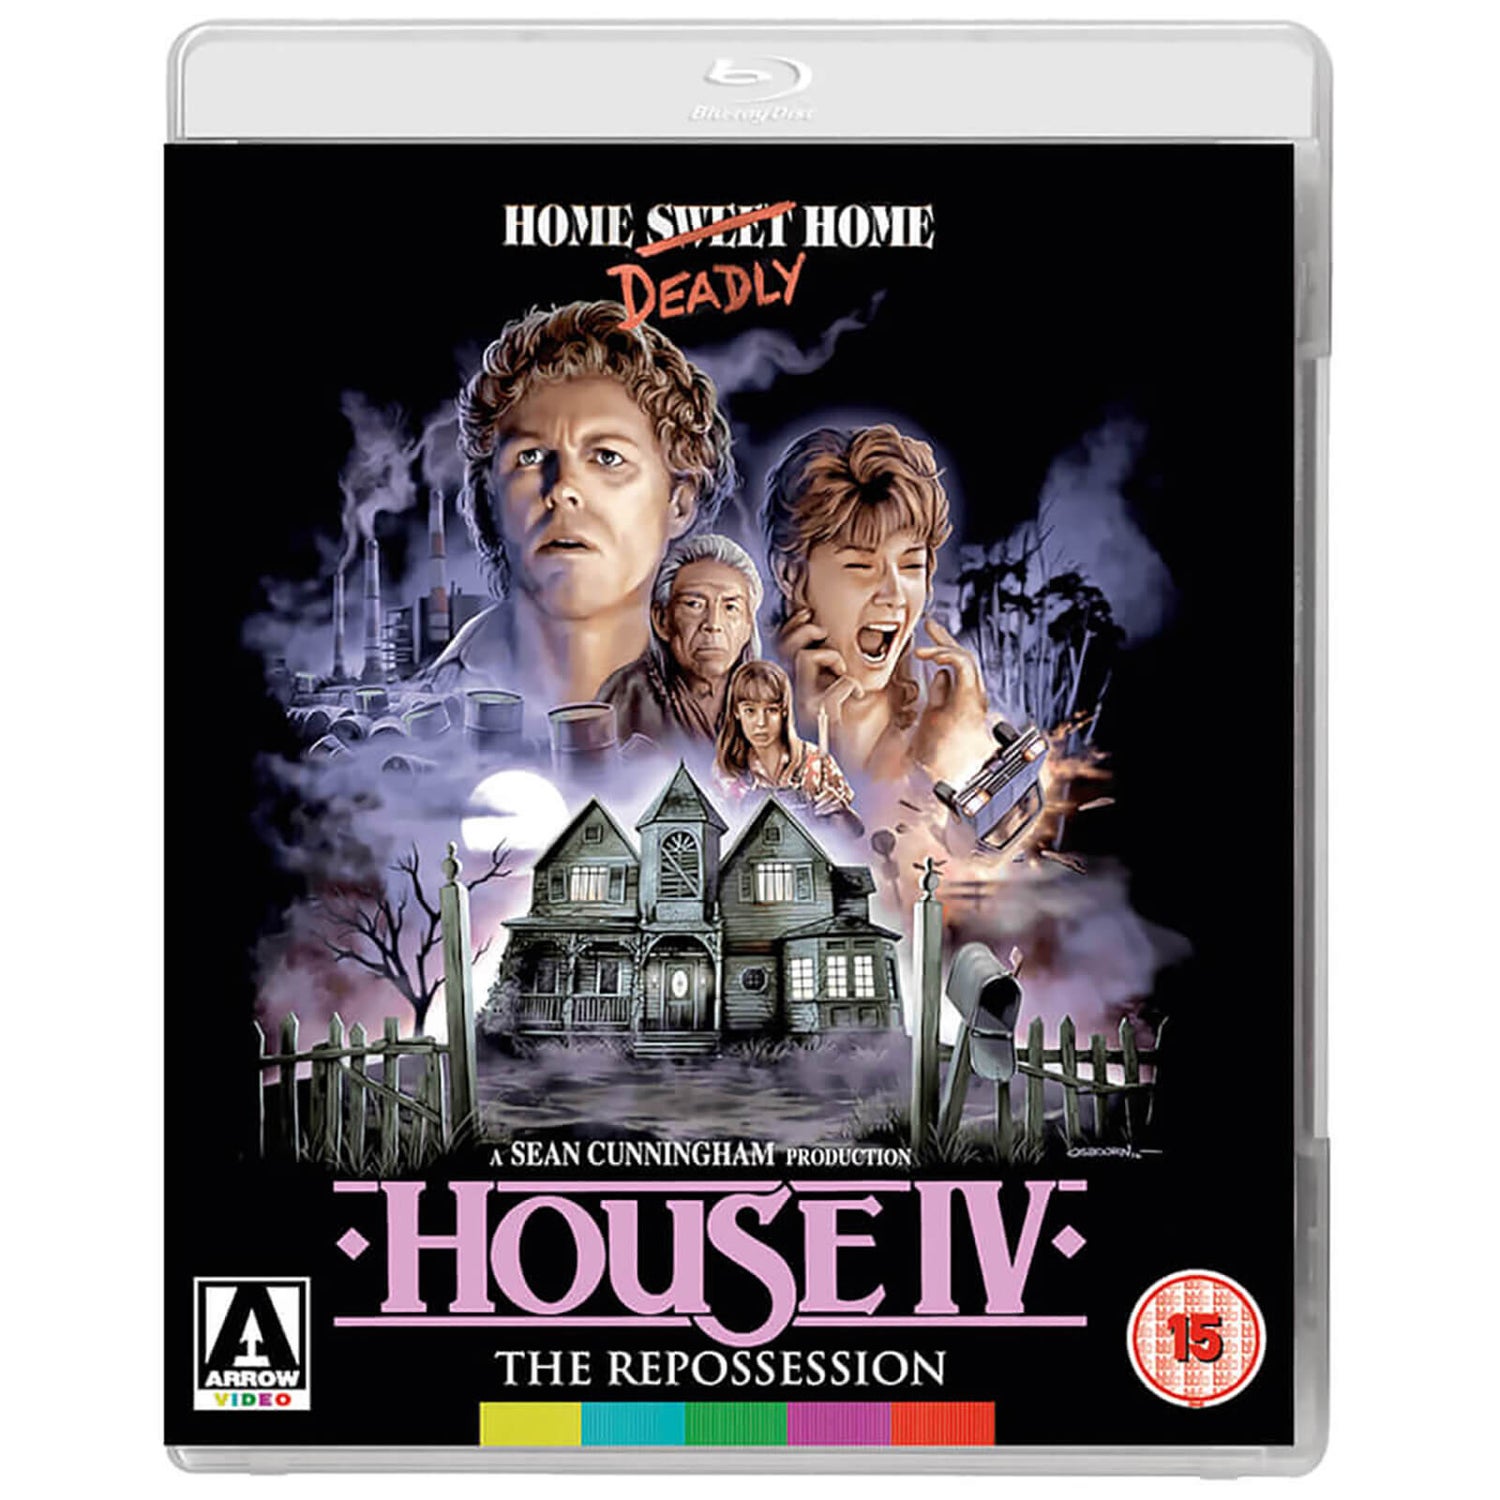 House IV: The Repossession Blu-ray